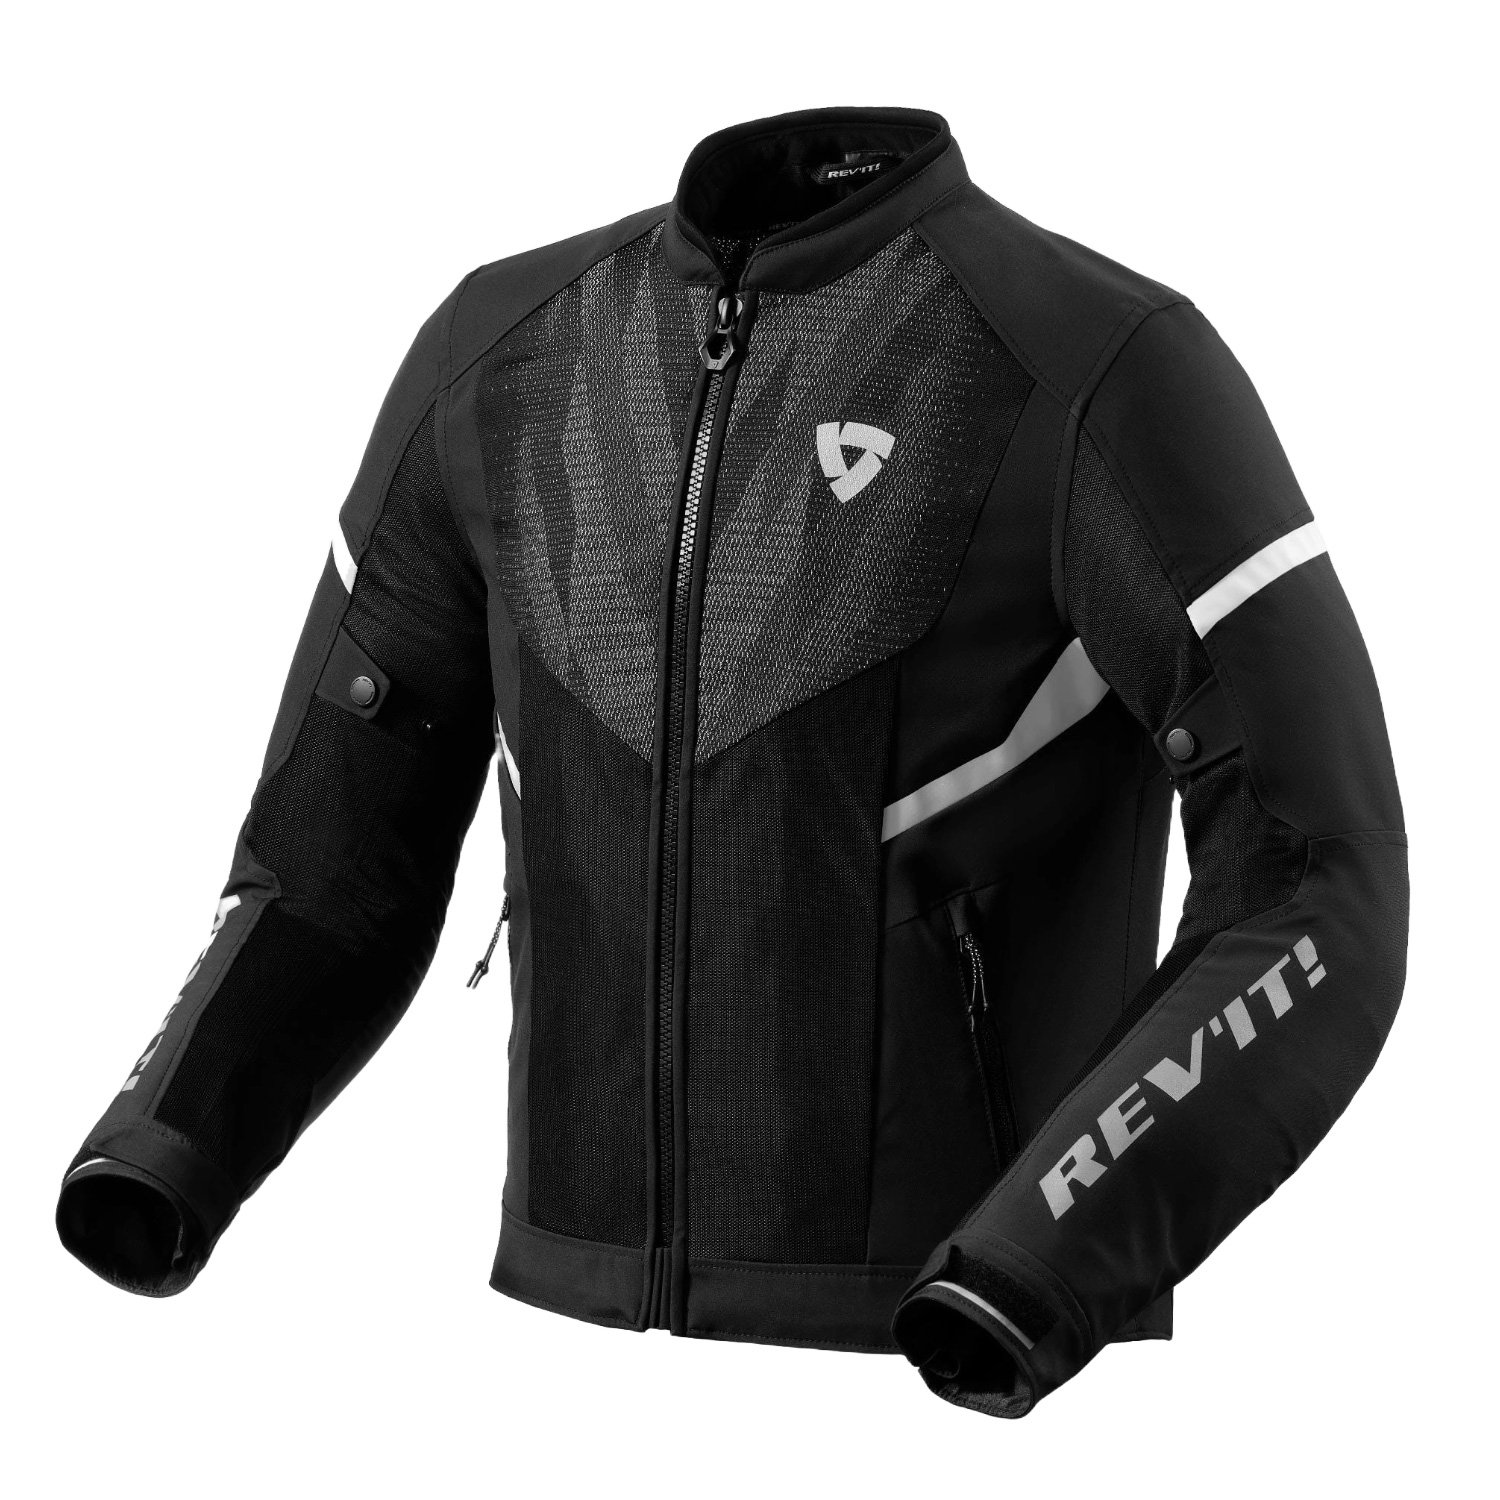 Image of REV'IT! Hyperspeed 2 GT Air Jacket Black White Size L ID 8700001367660